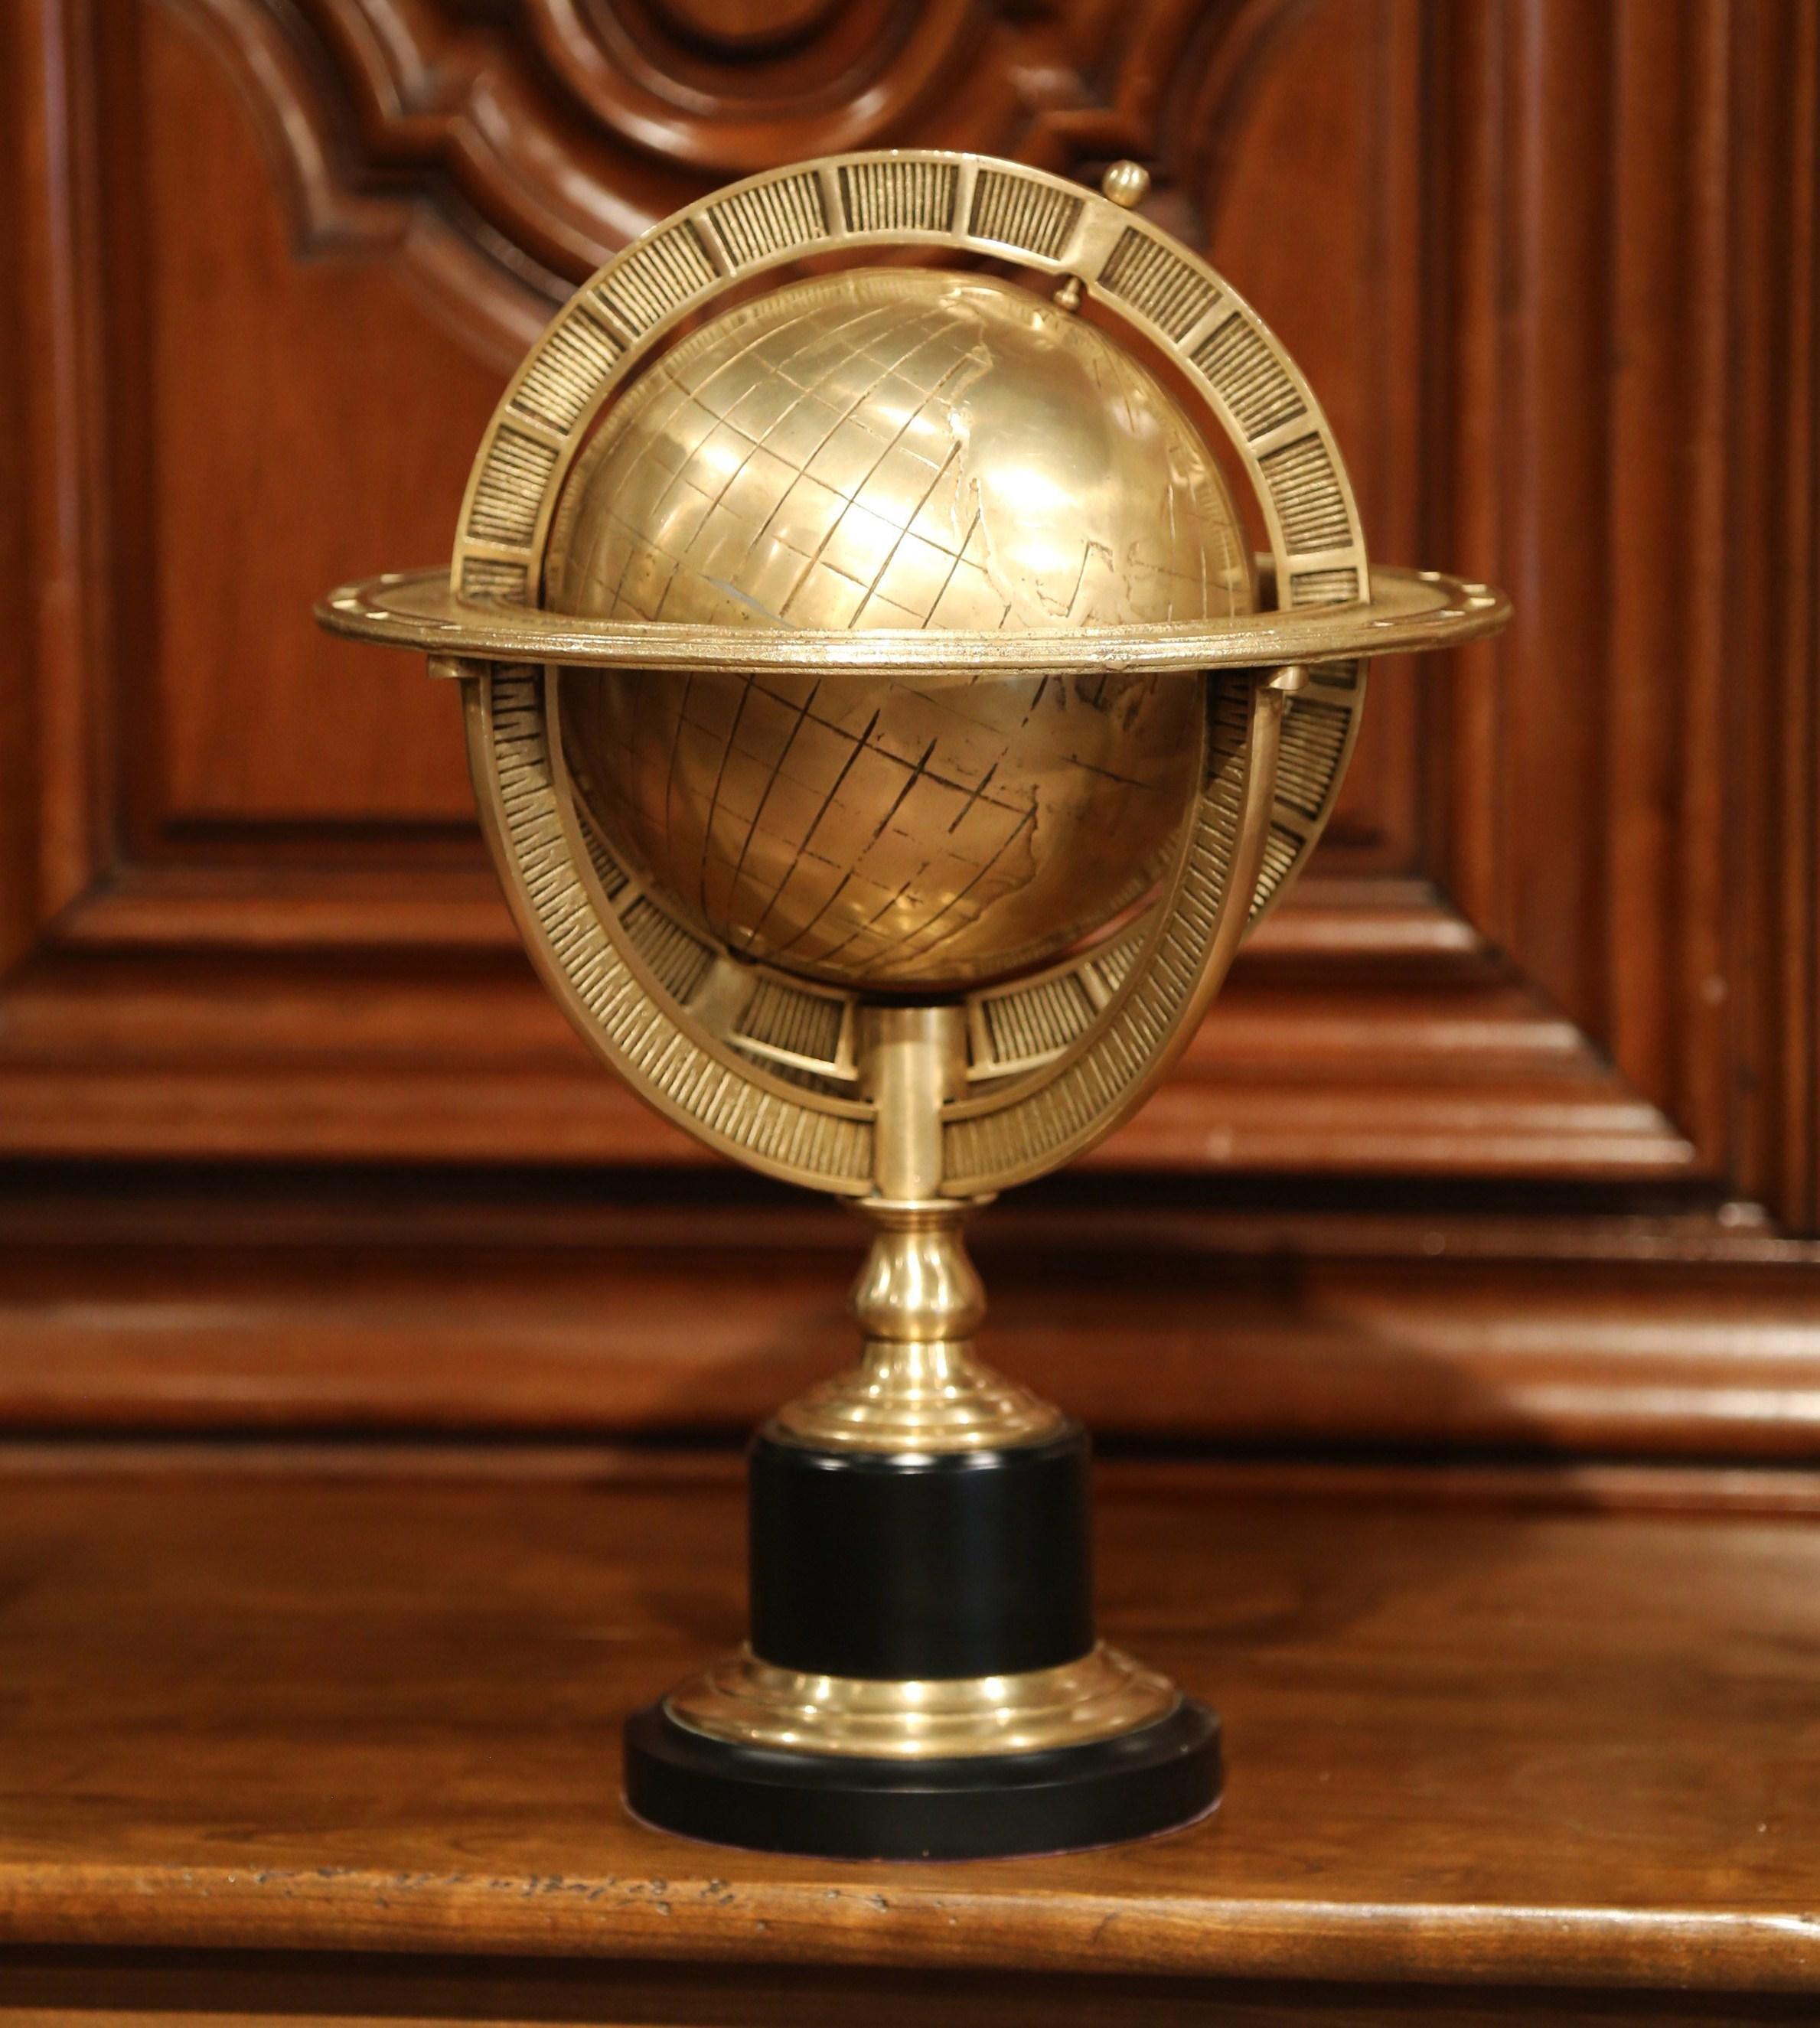 Bronze Globe Logo - Mid-20th Century Bronze Globe on Wooden Stand For Sale at 1stdibs